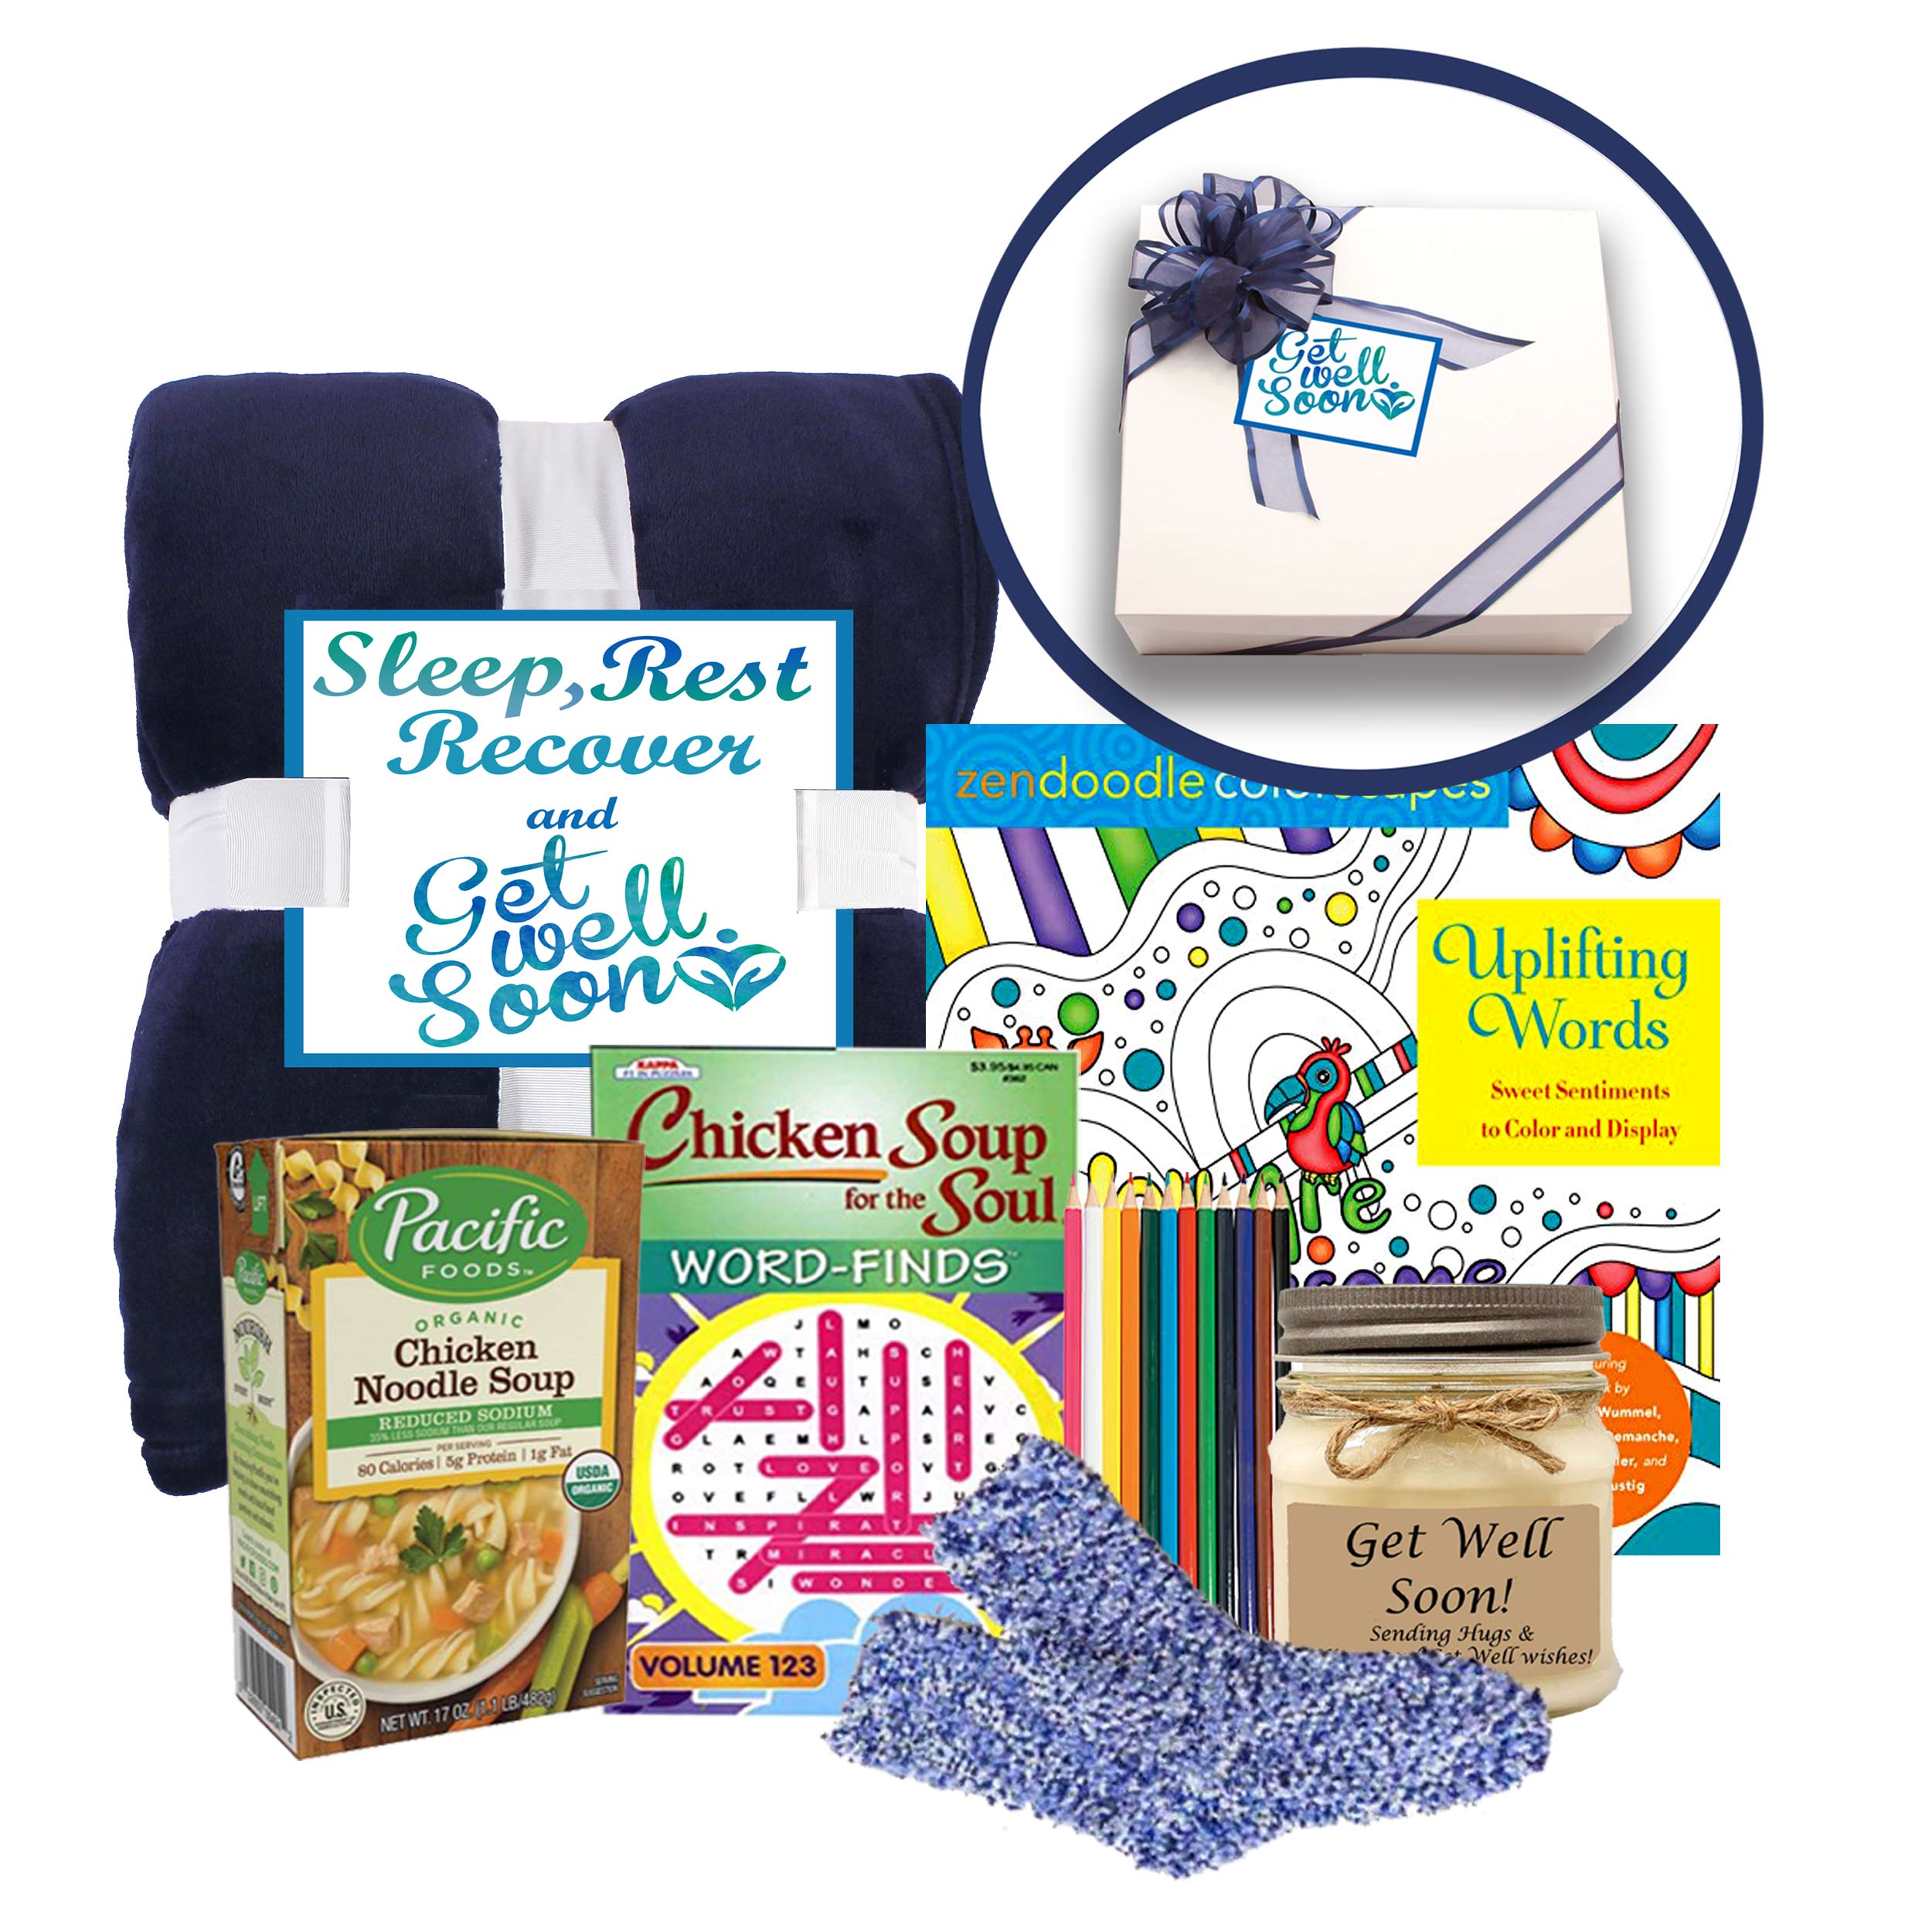 Sleep, Rest and Recover" Get Well Gift Basket for Women